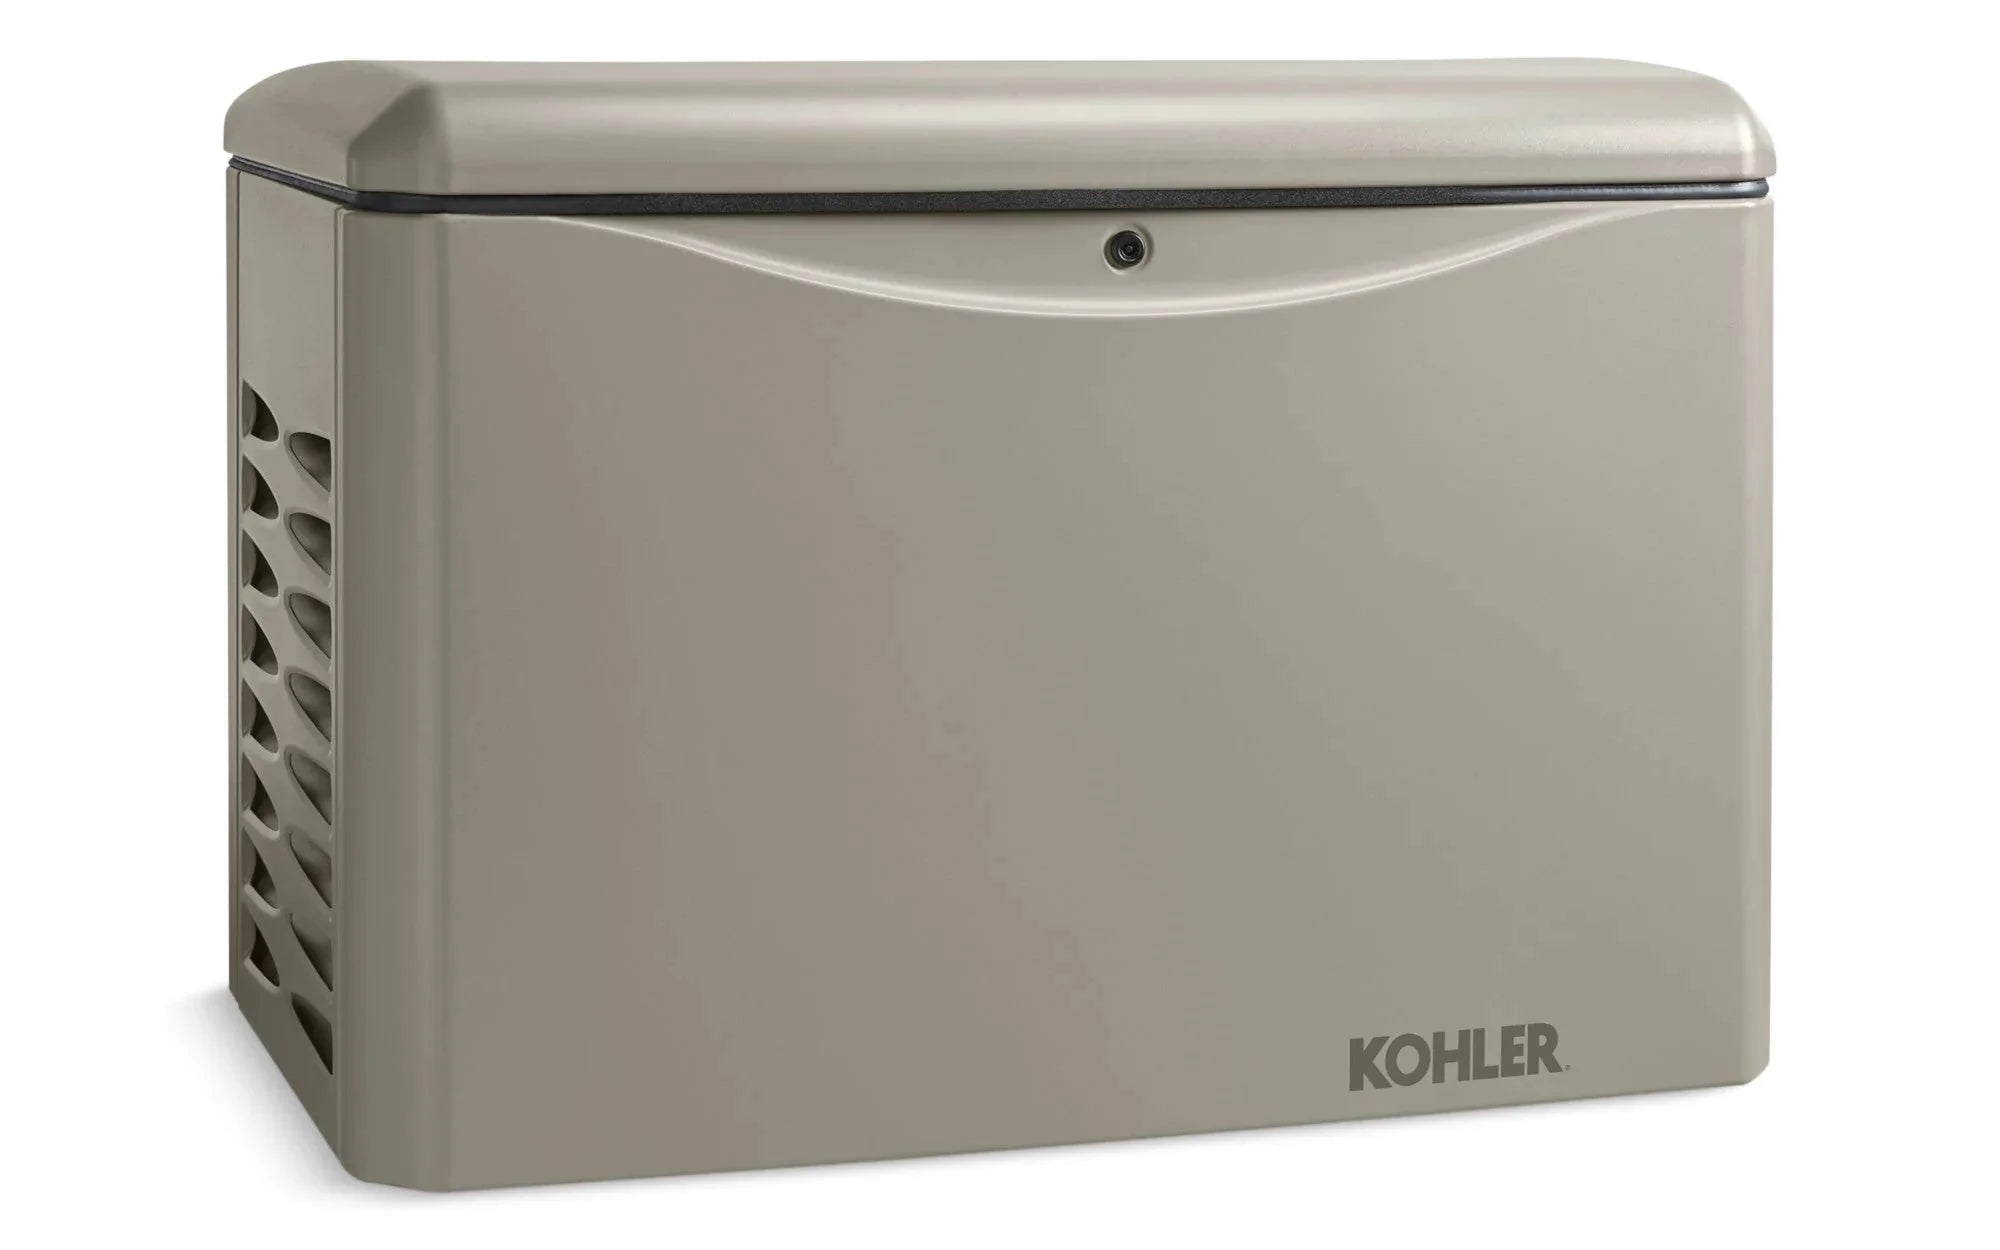 Kohler 20RCA-QS8 20KW 120/240V 3-Phase Standby Generator with OnCue Plus New